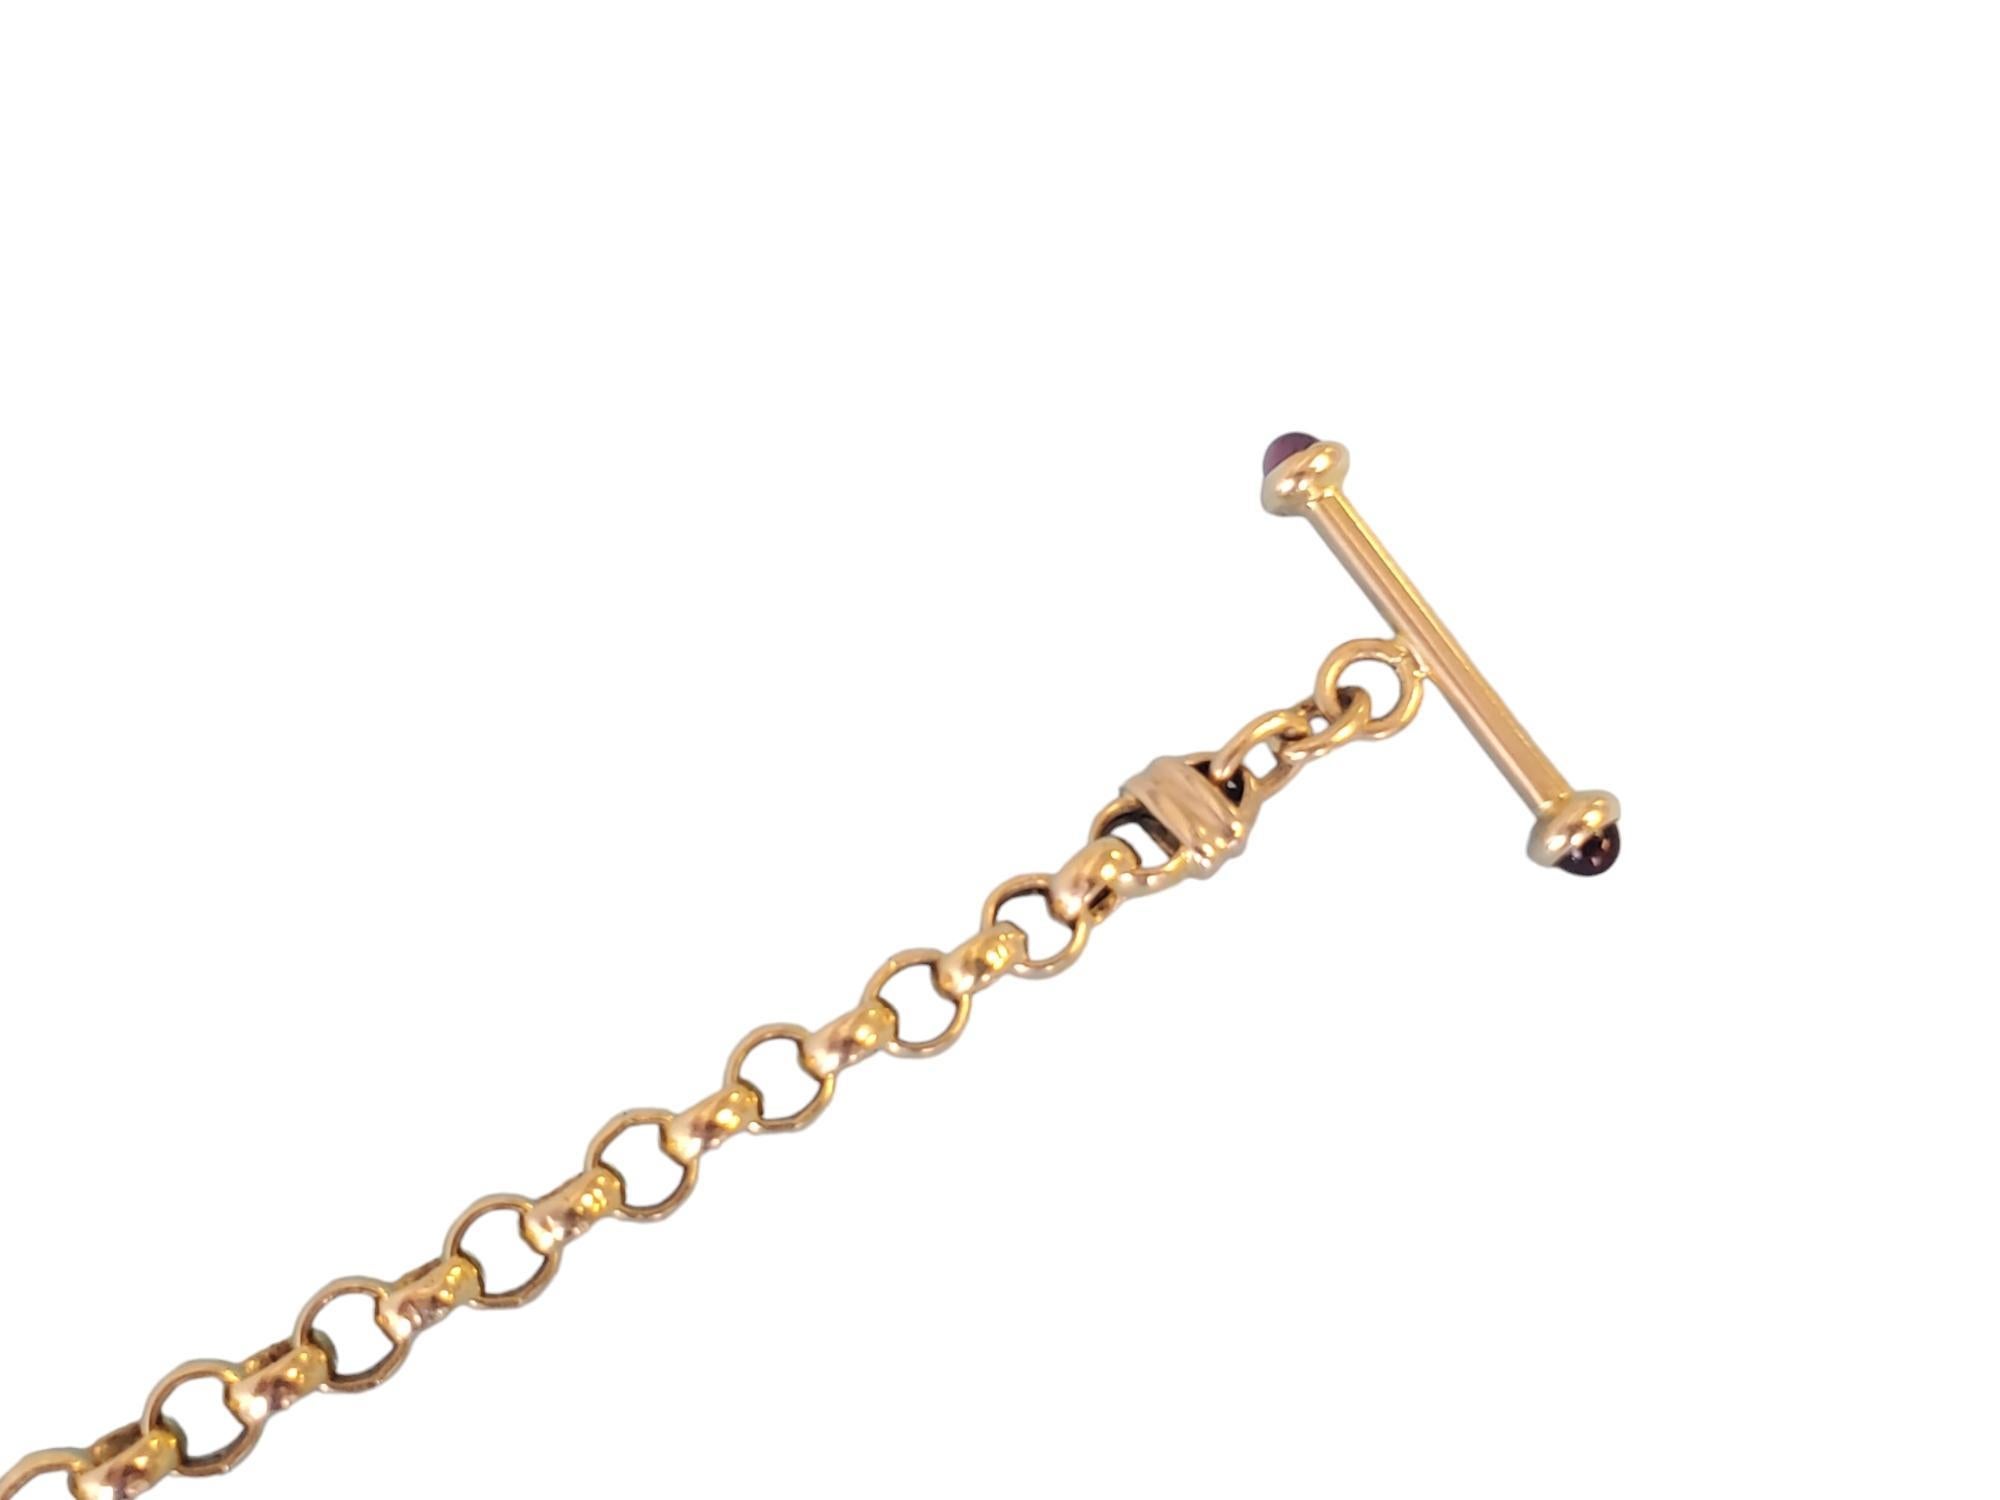 Estate 14k Toggle Bracelet Yellow Gold Link Chain with Heart Lock For Sale 2